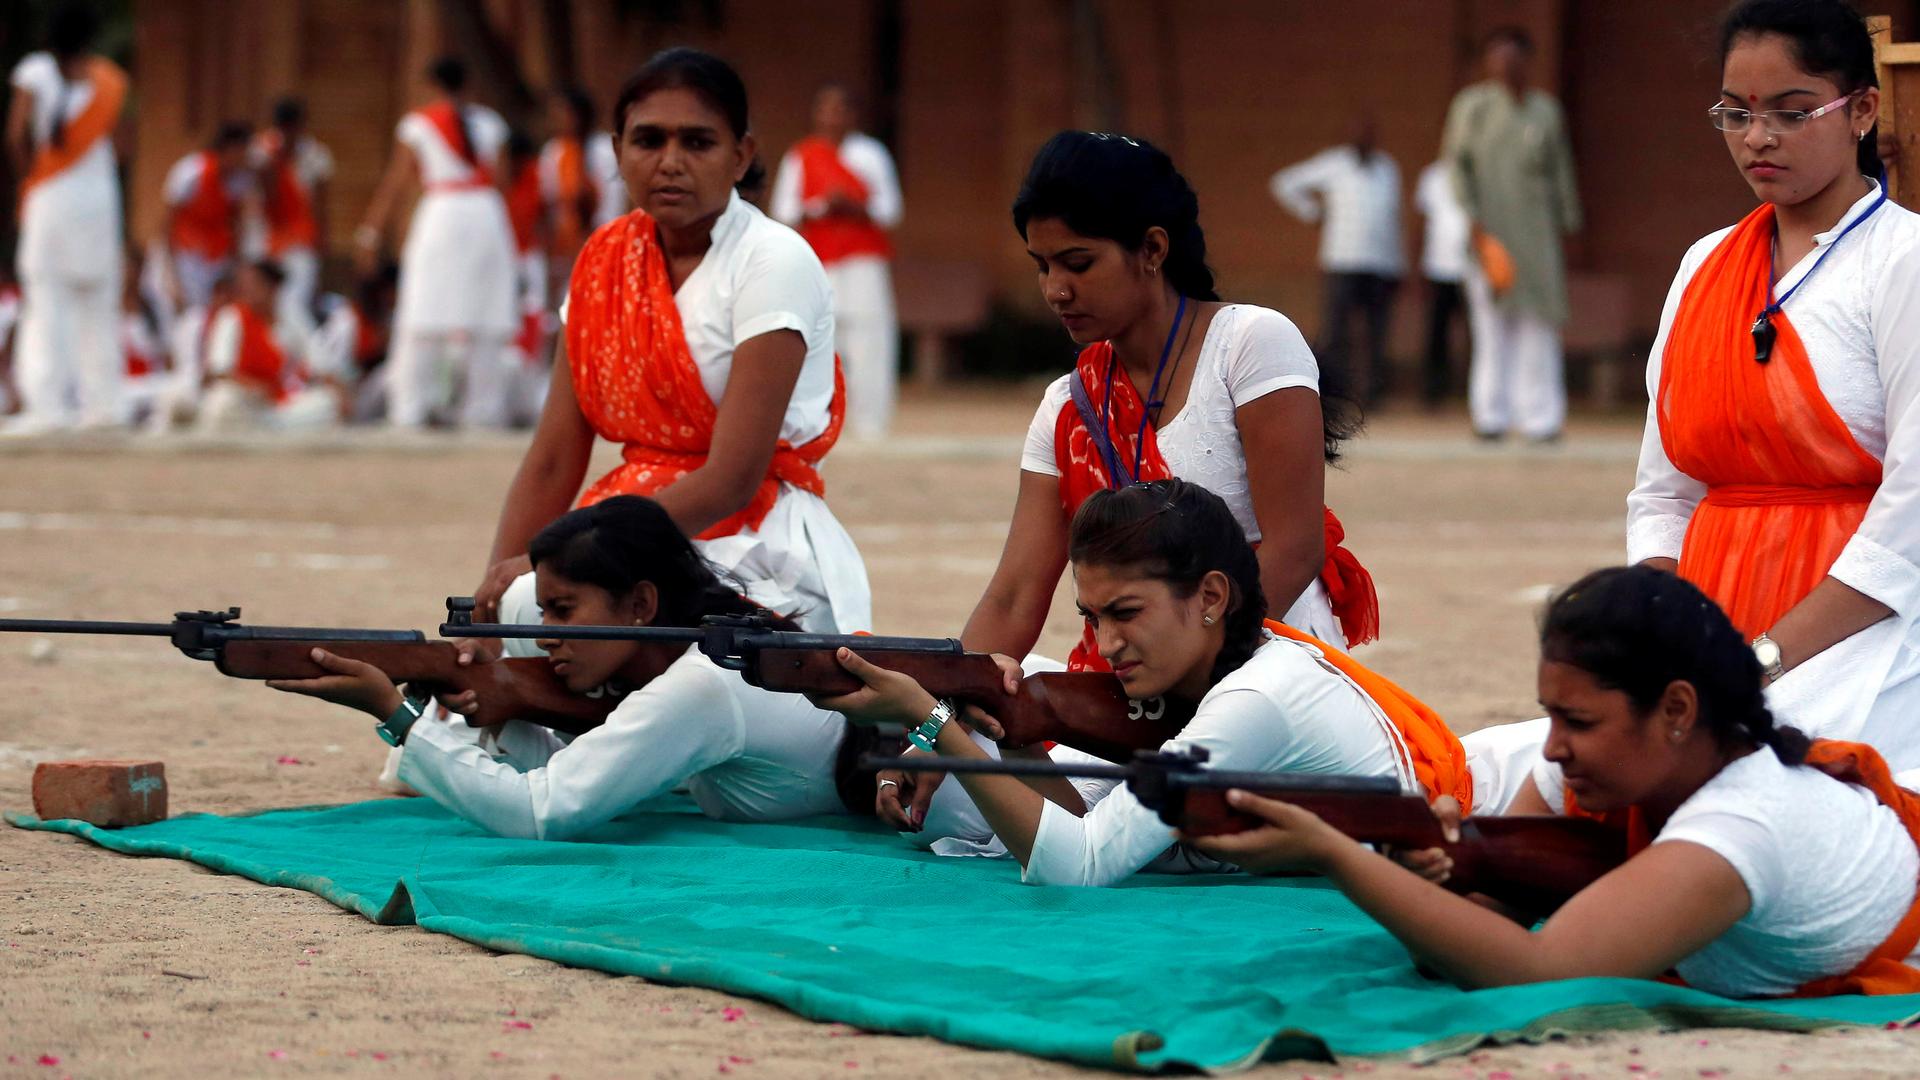 Women lie on a green cloth and practice aiming their guns while wearing red sashes. 